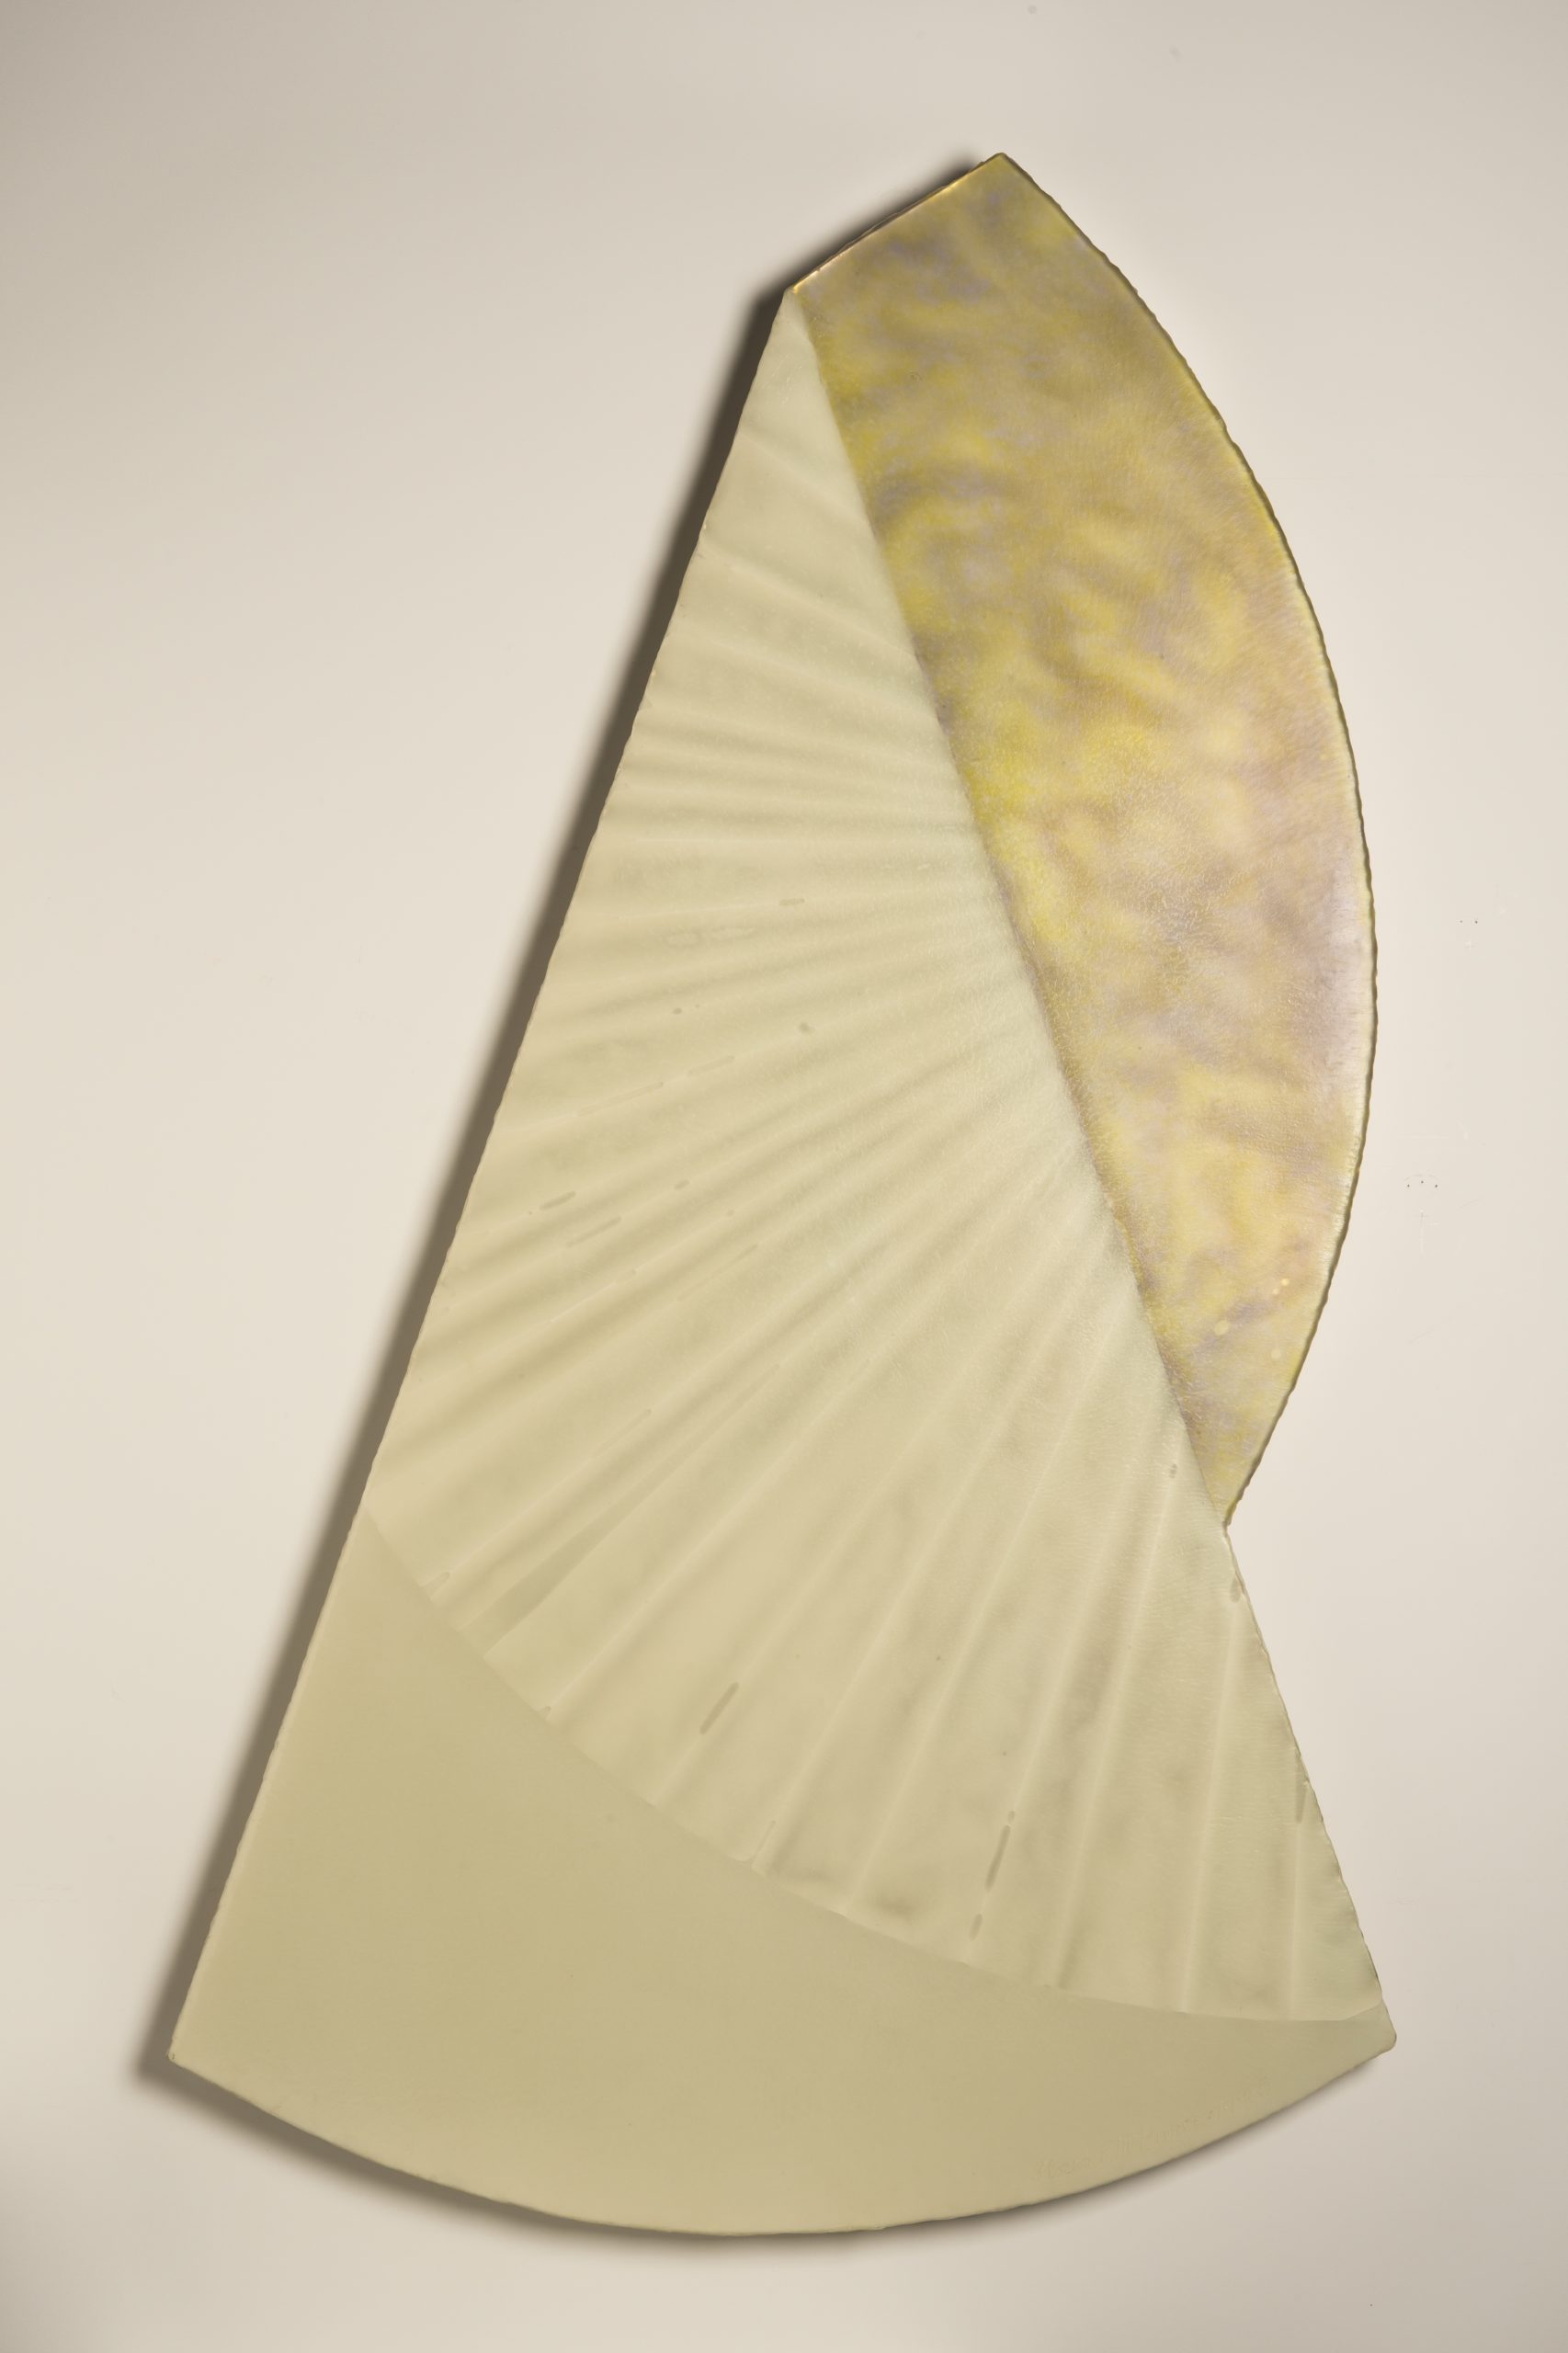 
		                					Florence Miller Pierce		                																	
																											<i>Untitled 1985,</i>  
																																								1985, 
																																								resin relief, 
																																								70 x 30 x 2 inches 
																								
		                				